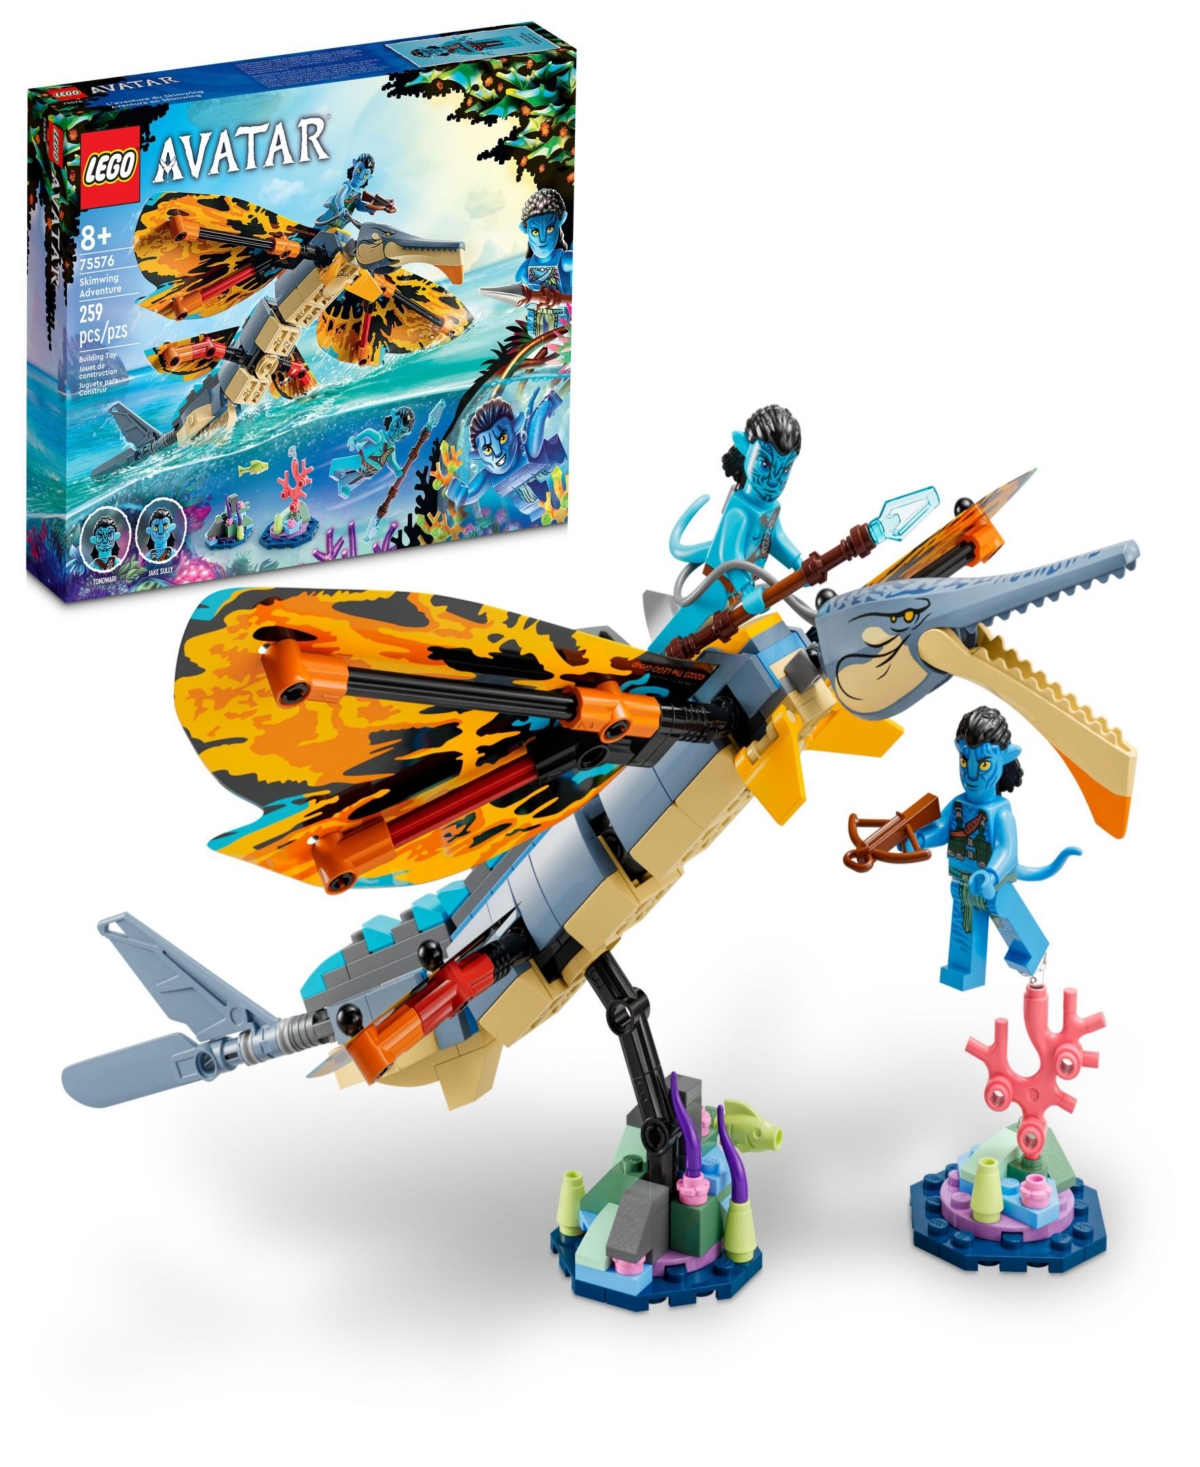 Lego Avatar 75576 Skimwing Adventure Toy Building Set With Tonowari & Jake Sully Minifigures In Multicolor